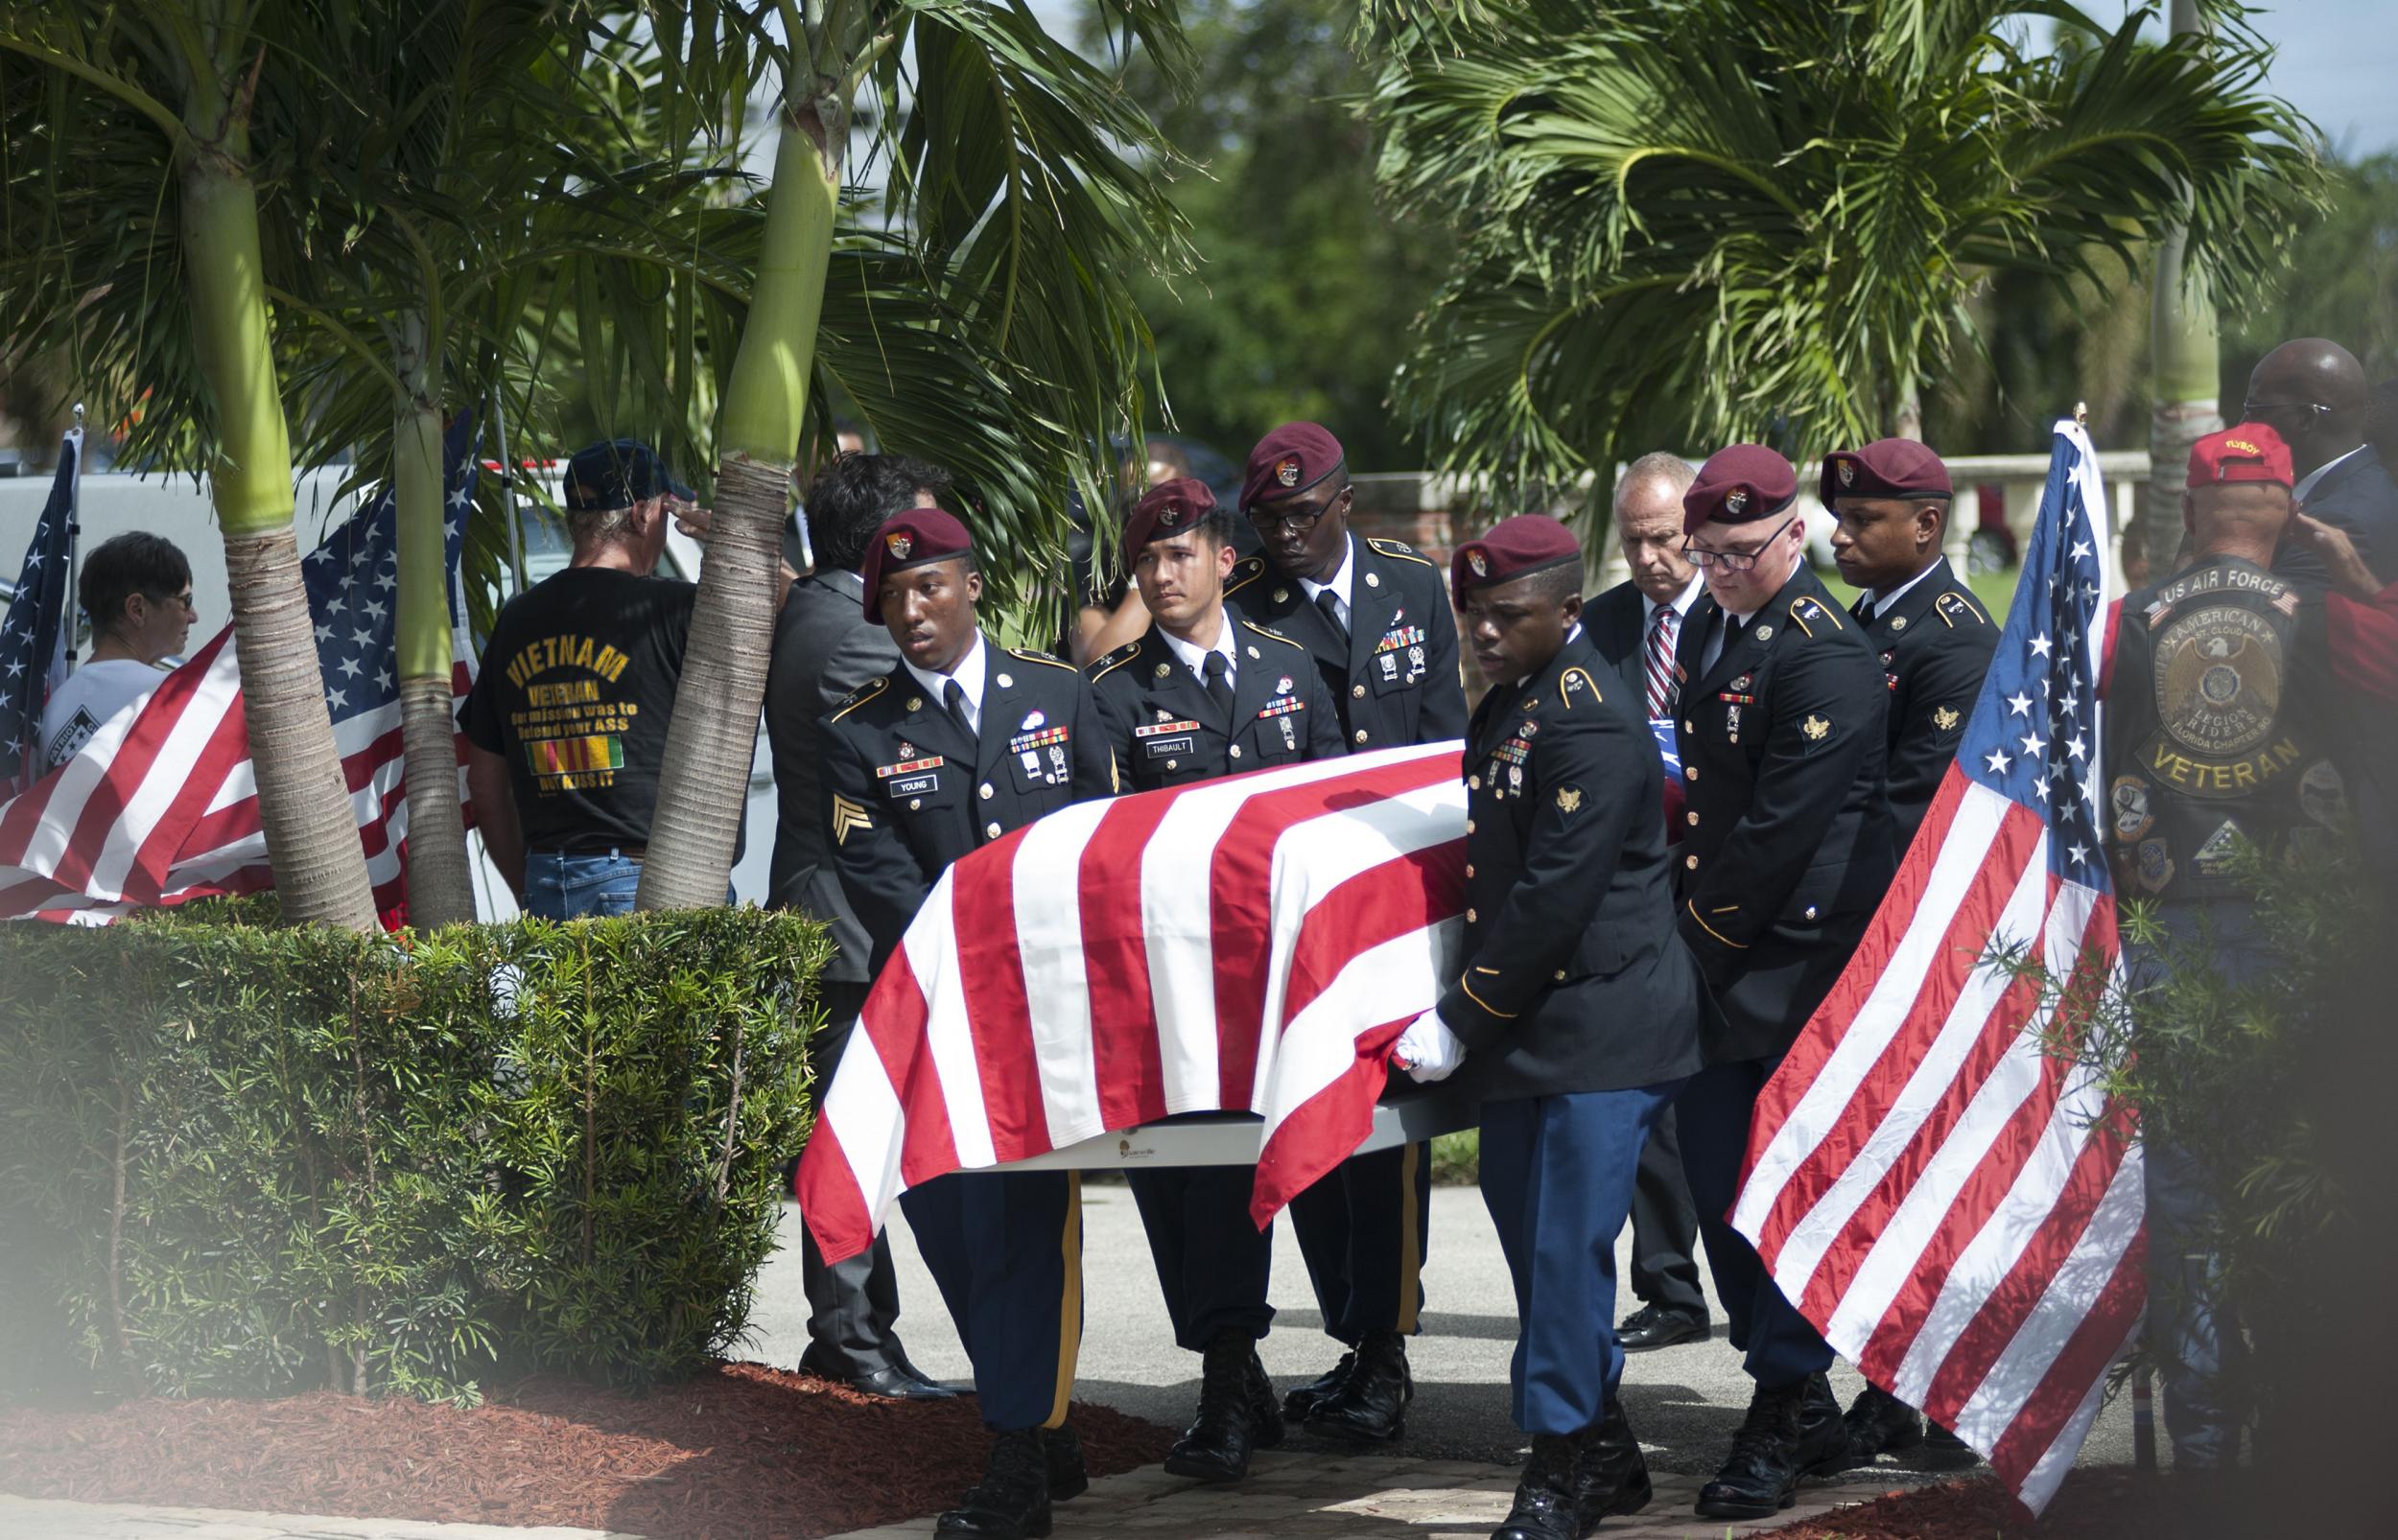 Military honour guards escorting the casket of Sgt La David Johnson, one of the soldiers killed in Niger